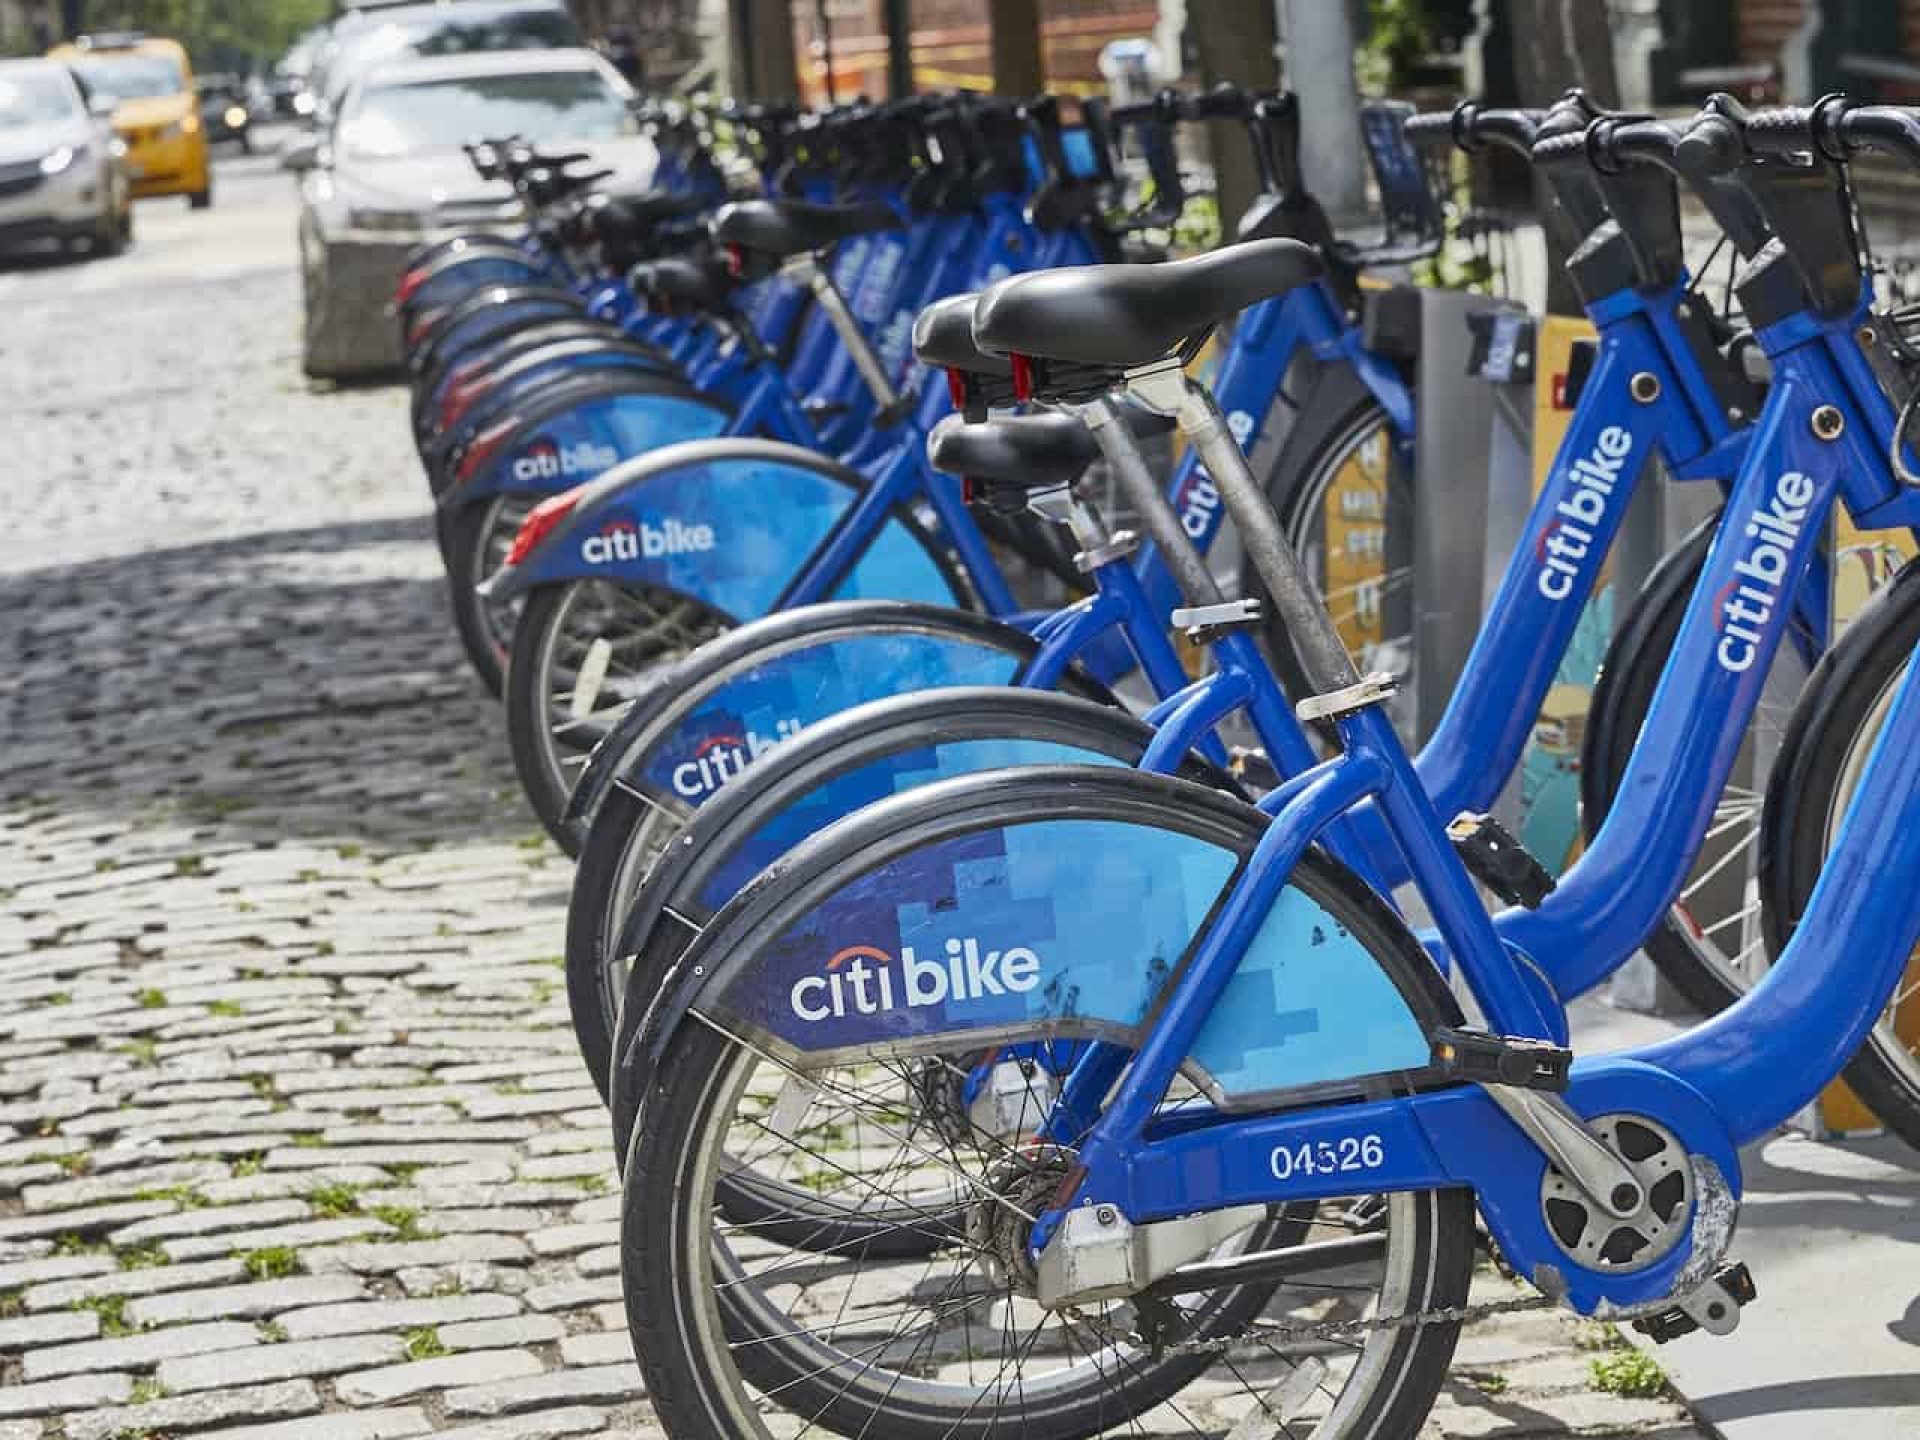 Blue Citi bikes lined up in bike racks along a brick street in the West Village neighborhood with cars in the background.